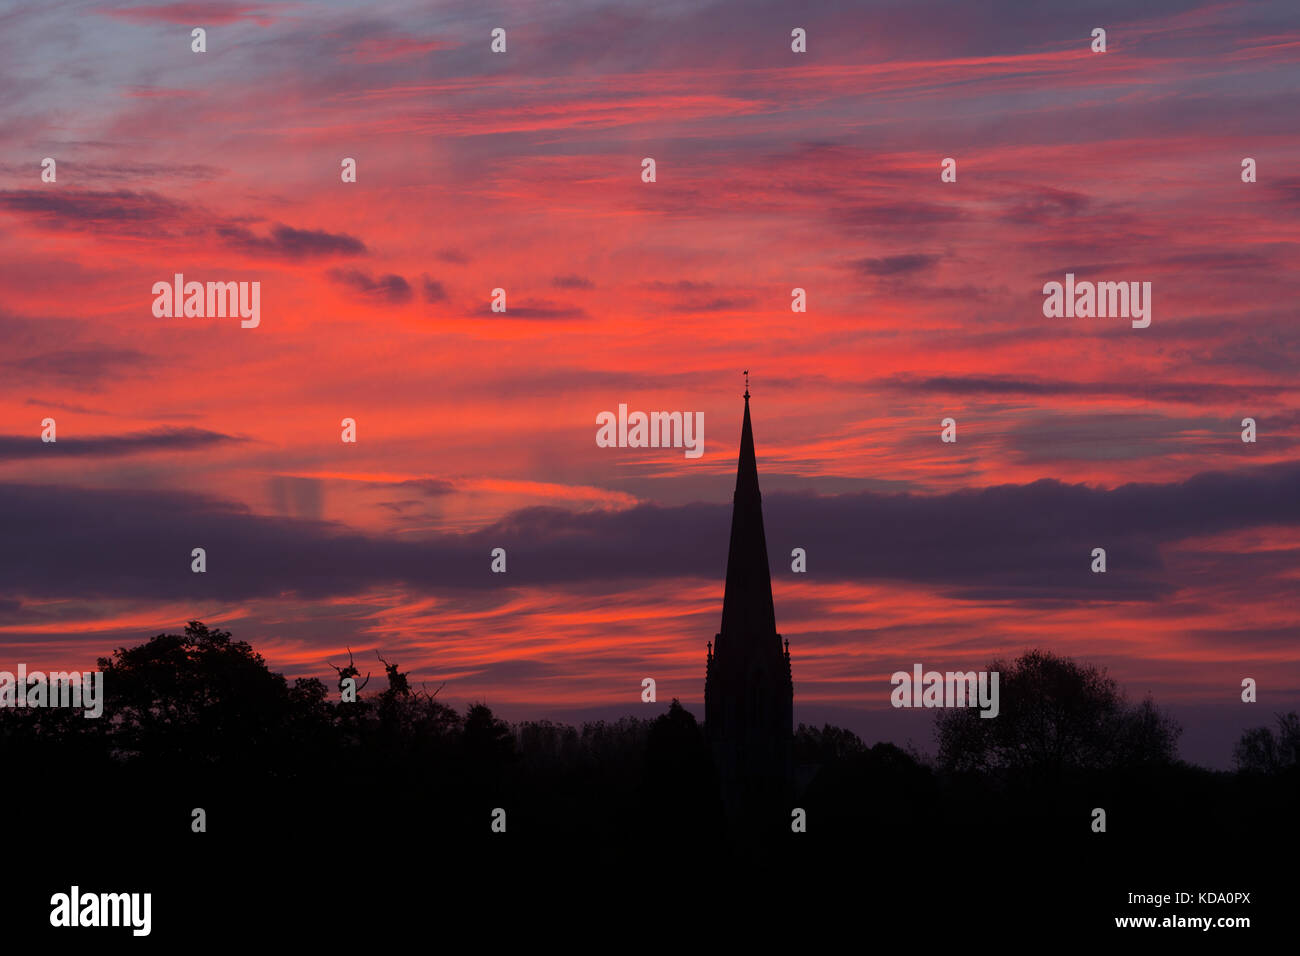 Sherbourne, Warwickshire, UK. 12th Oct, 2017. UK Weather. A spectacular dawn sky forms a backdrop to the spire of All Saints Church at Sherbourne, a village in Warwickshire. The Victorian Gothic church was designed by the eminent architect Sir George Gilbert Scott. Credit: Colin Underhill/Alamy Live News Stock Photo